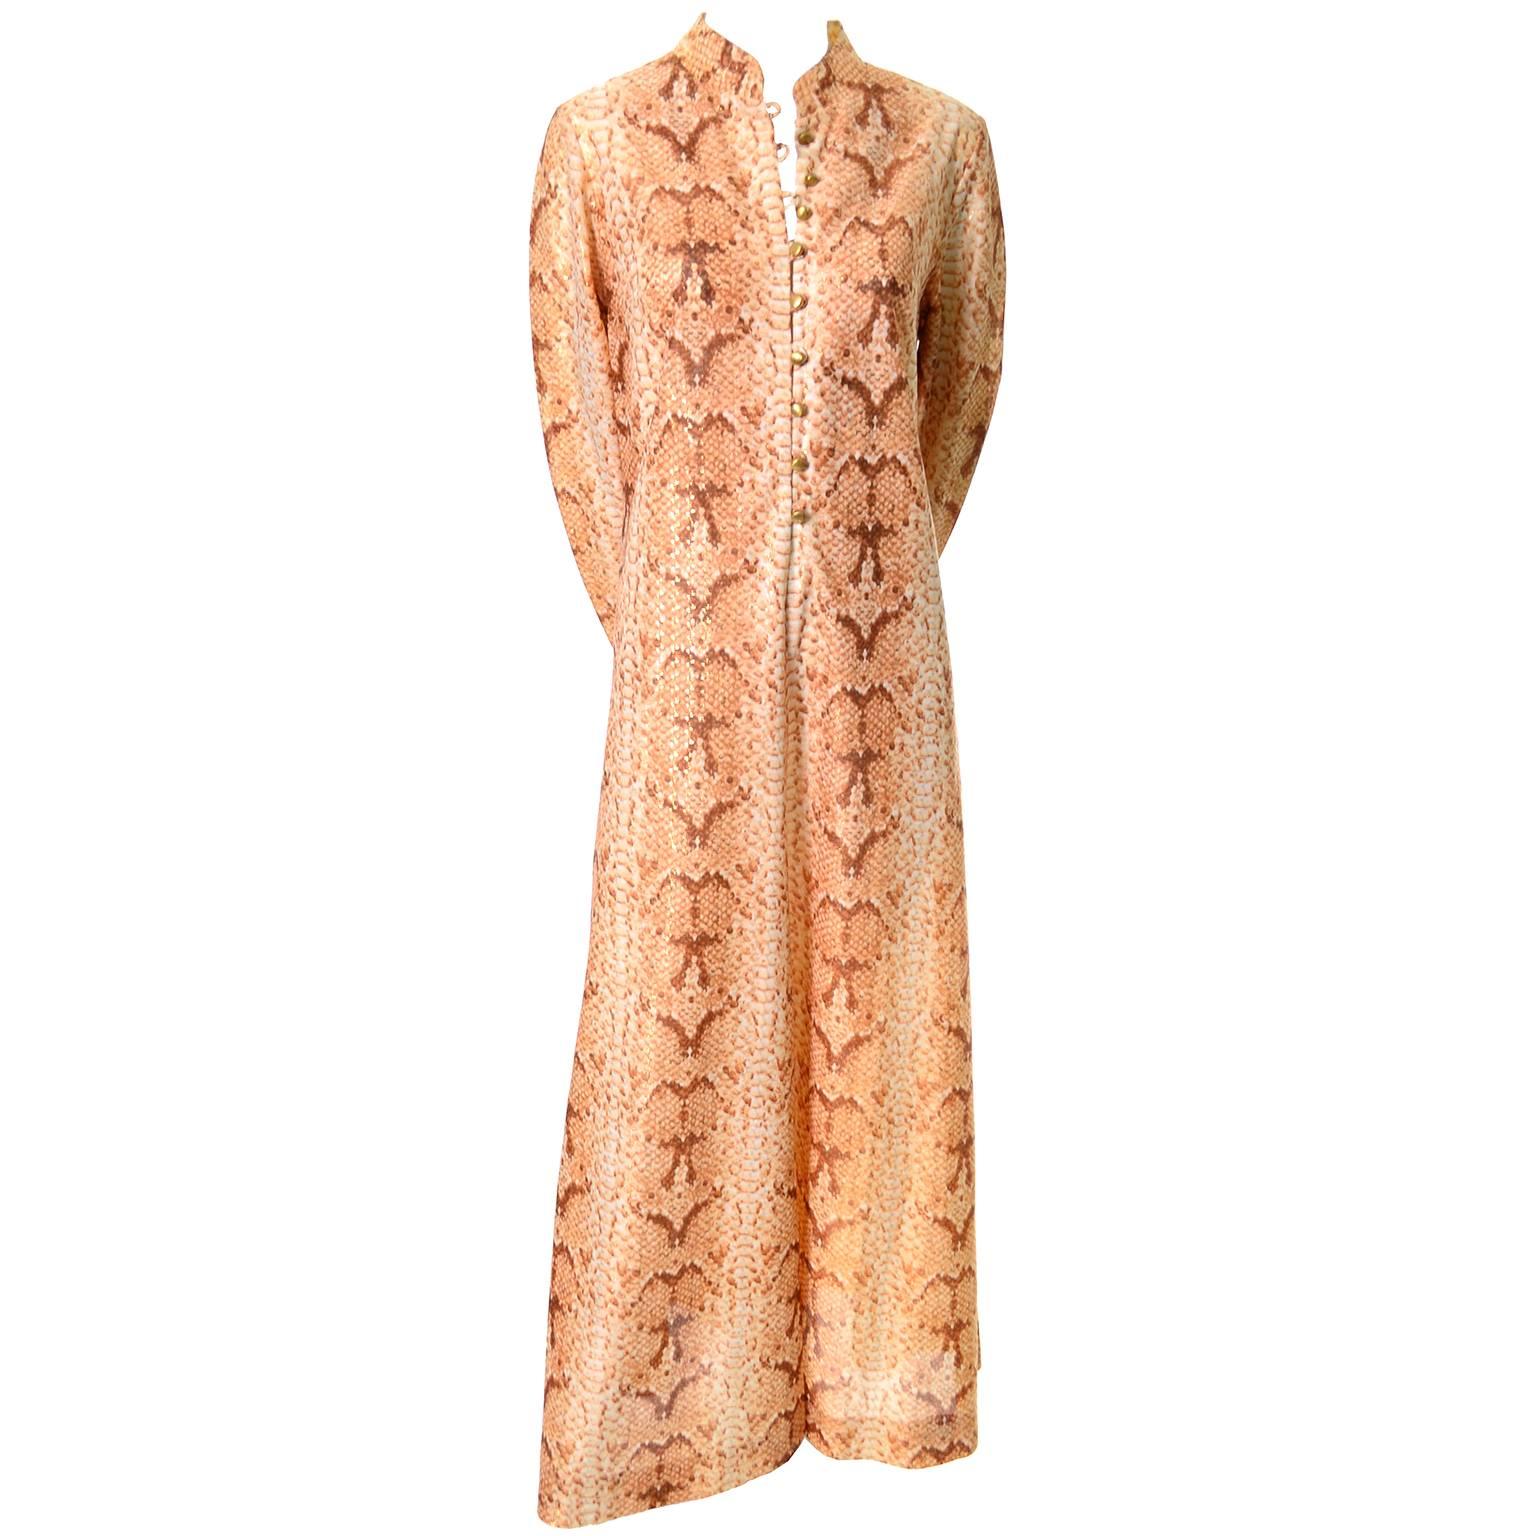 This is a stunning vintage caftan style maxi dress from B. Cohen by Jaconelli that was purchased at I Magnin in the late 1960's or early 1970's.  The fabric is lightweight and the print features a subtle gold bronze metallic python design. There are